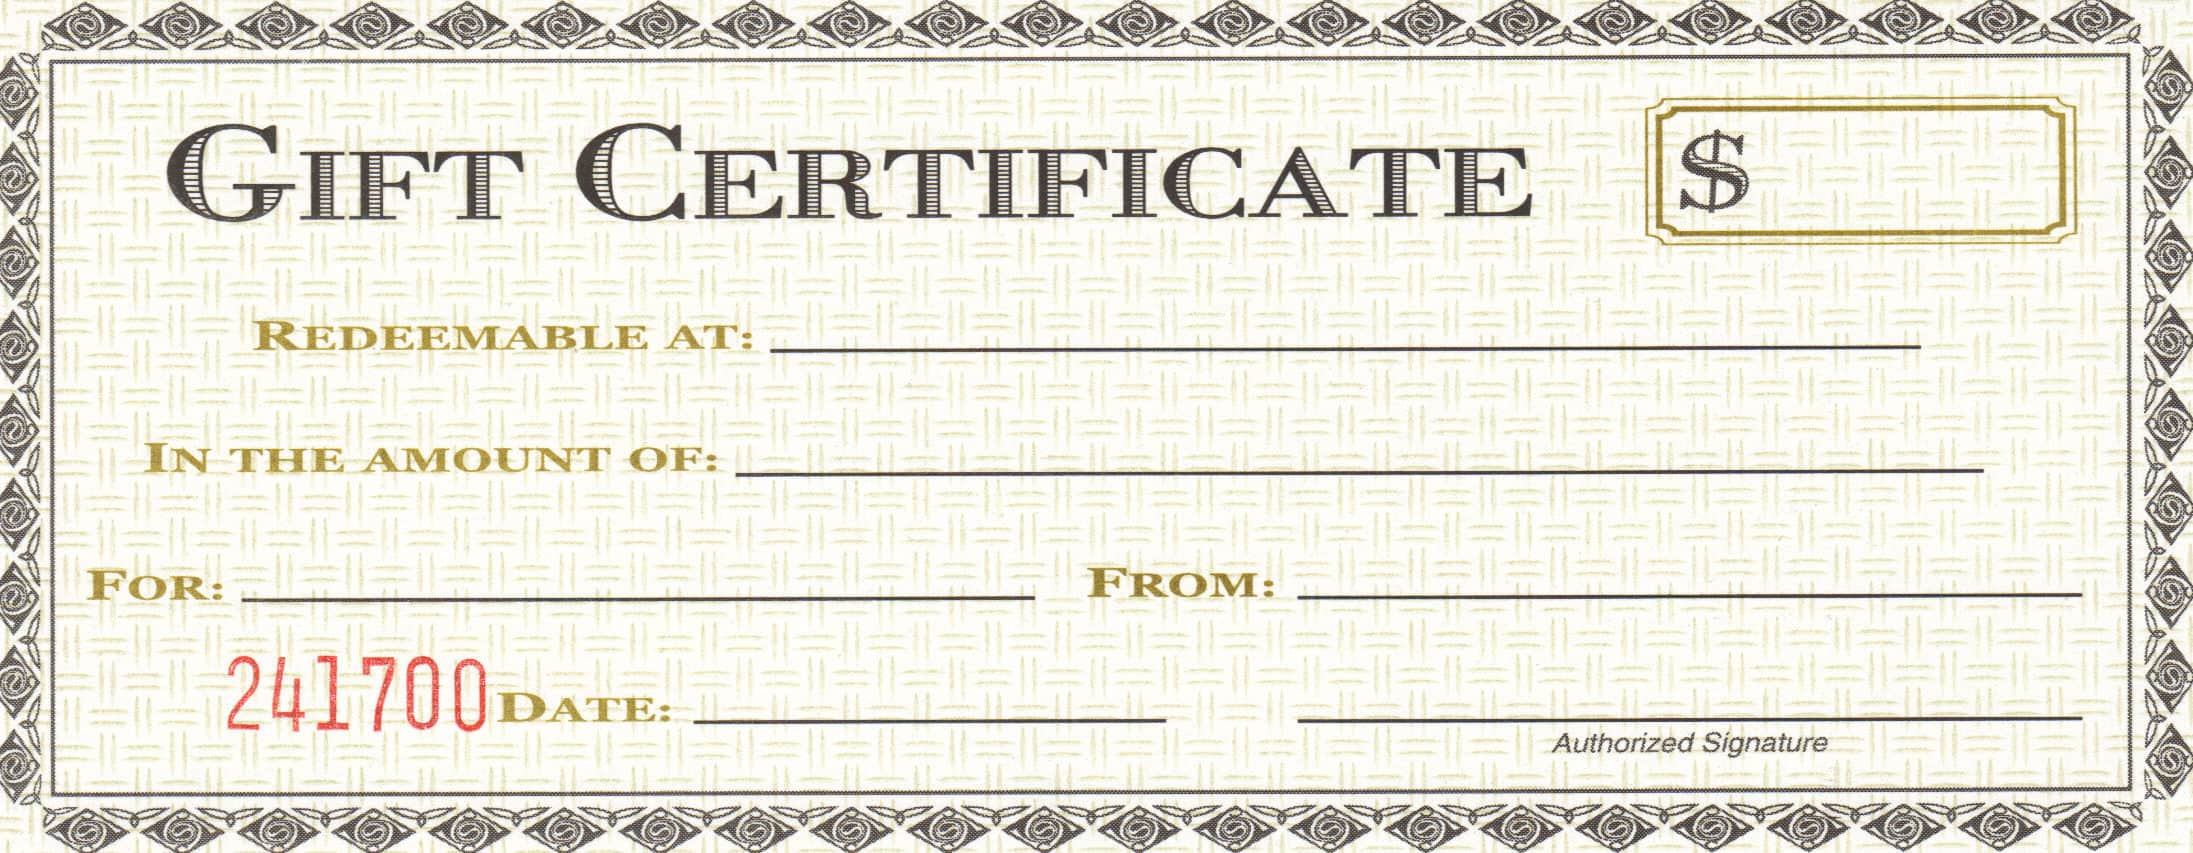 gift certificate templates free download word